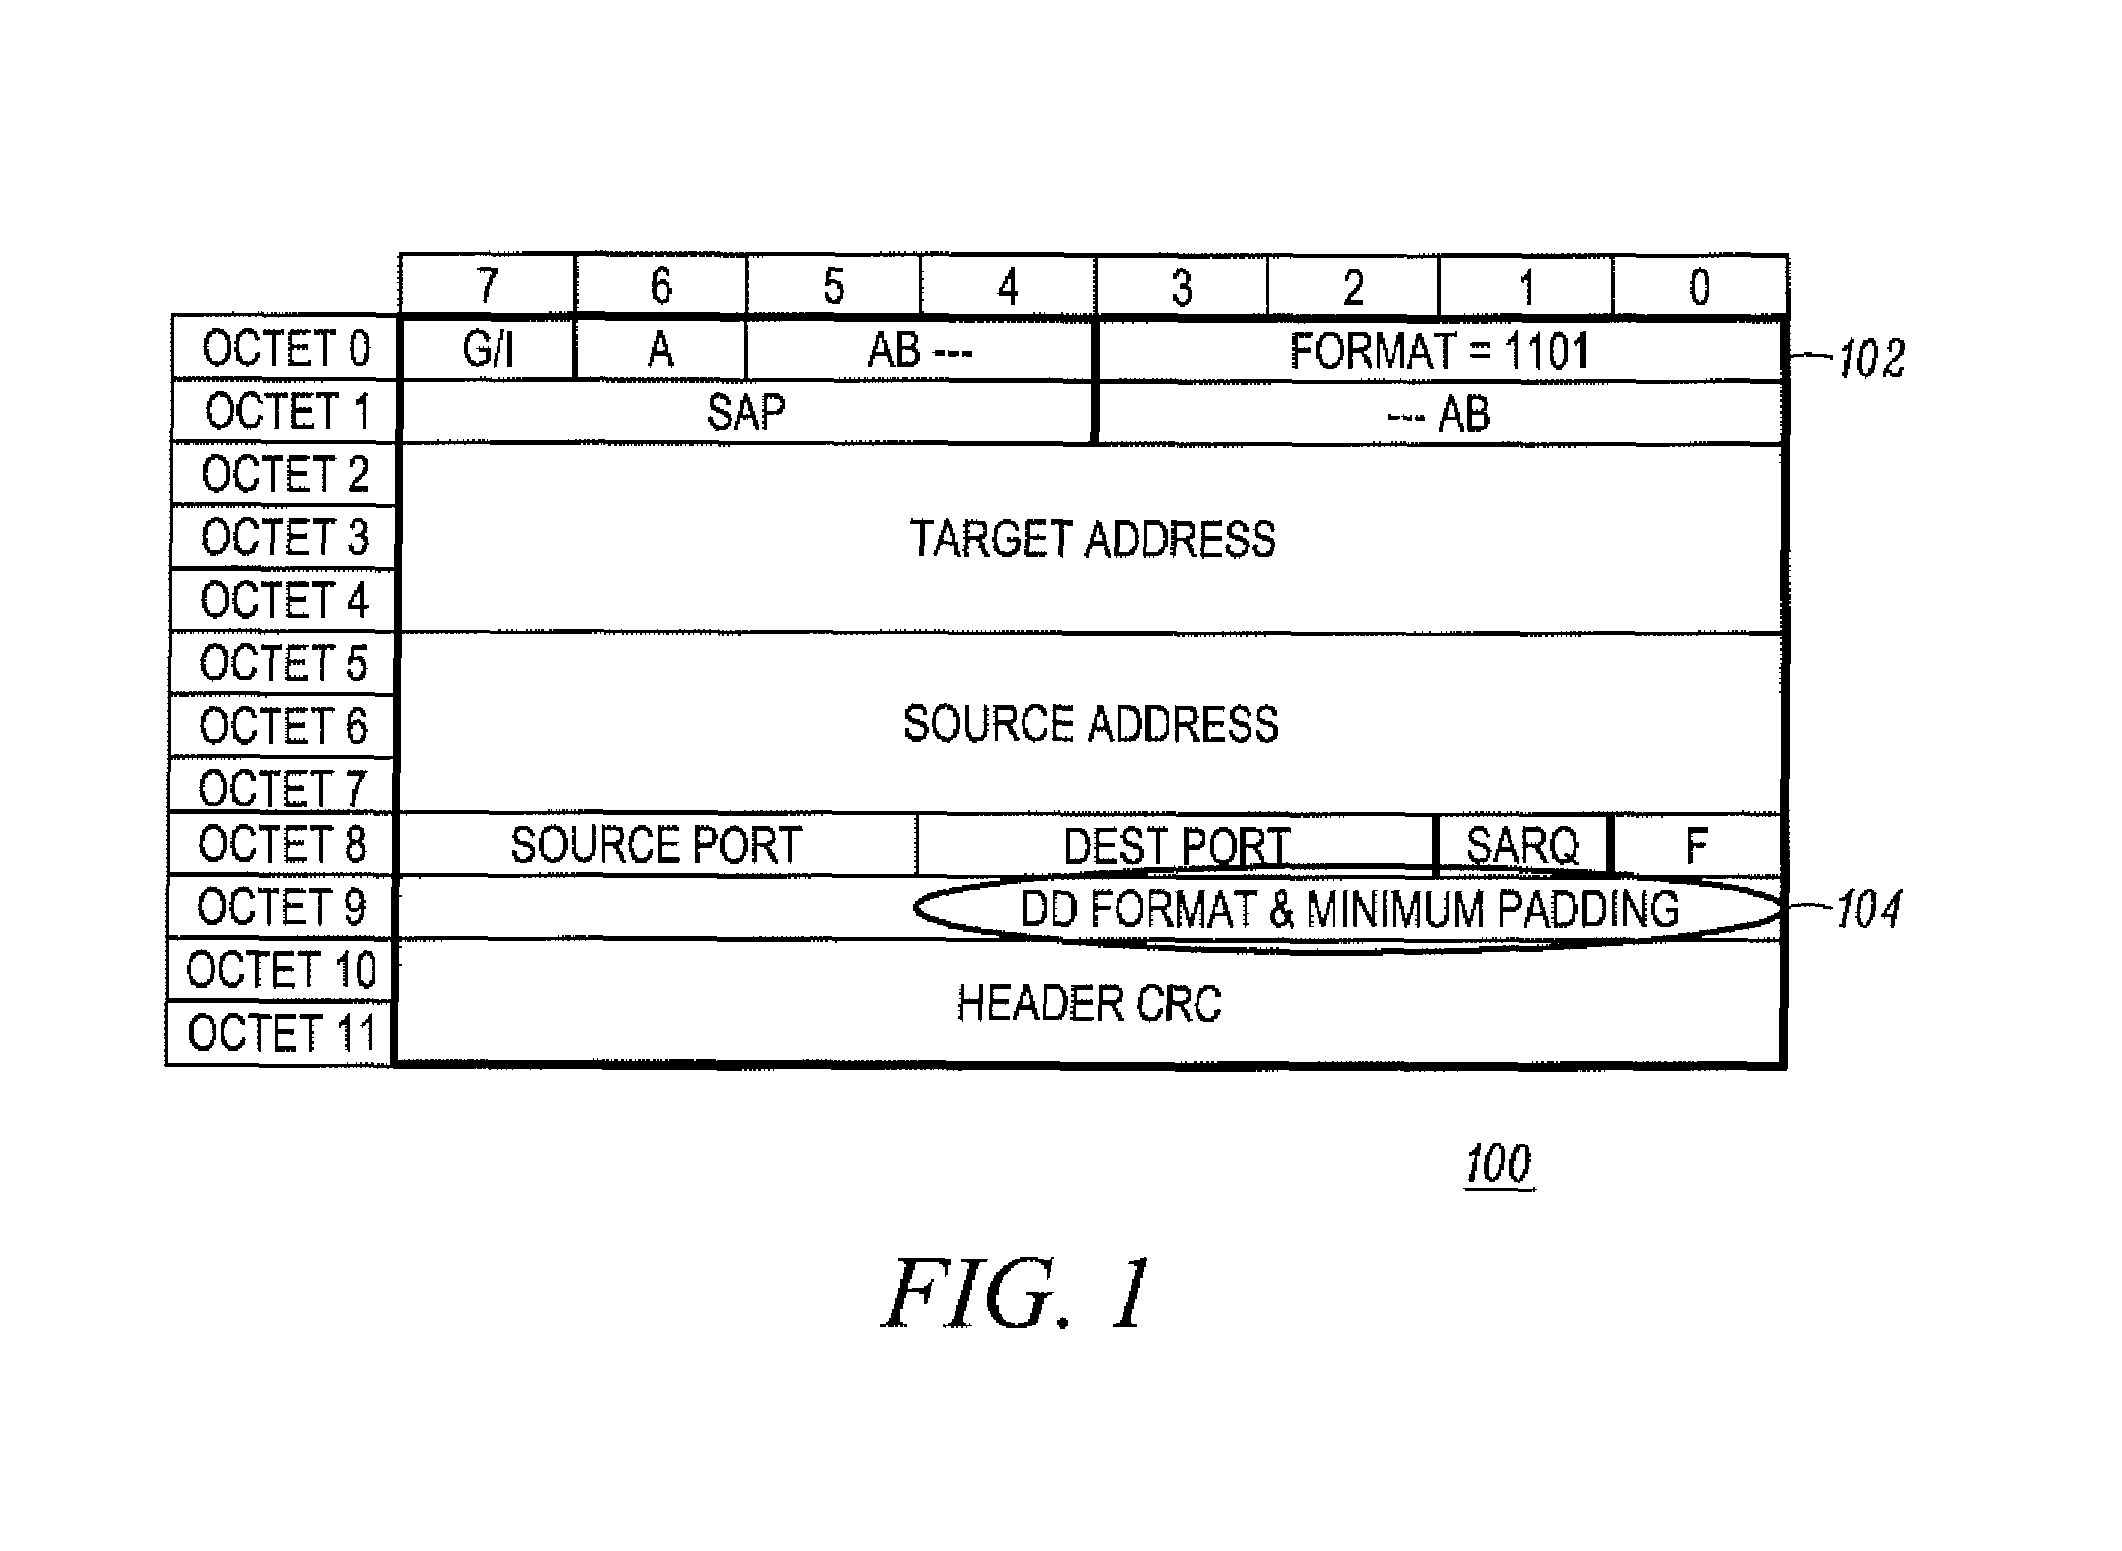 Method for indicating padding in a digital mobile radio system